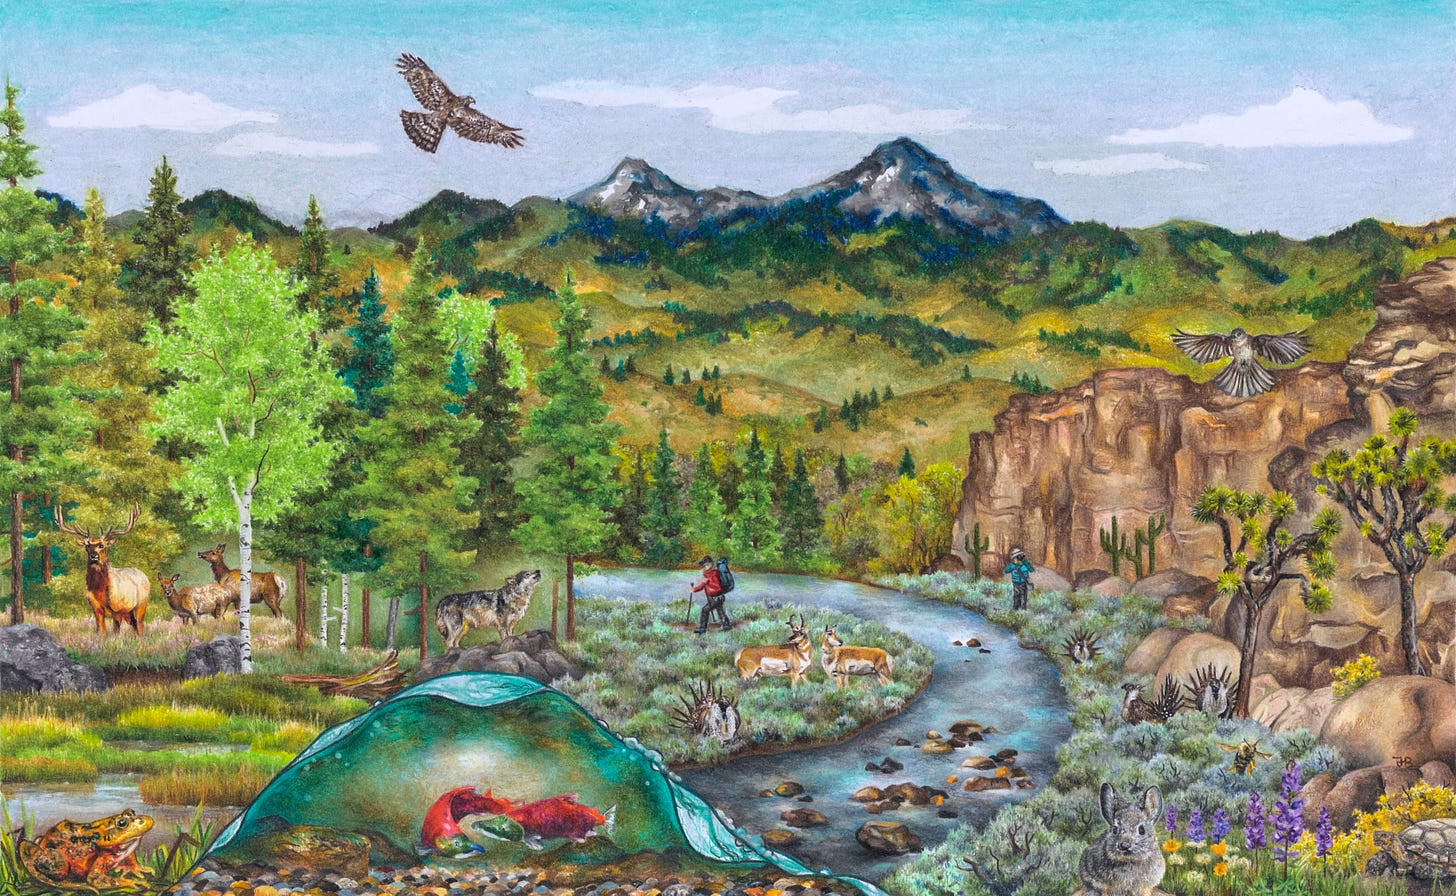 multiple western environments imagined together in one scene: Mountains, desert, a stream, a forest, with animals native to those ecosystems: hawks, elk, sage grouse, rabbit, salmon, a grey wolf, as well as a human fishing and another backpacking. 